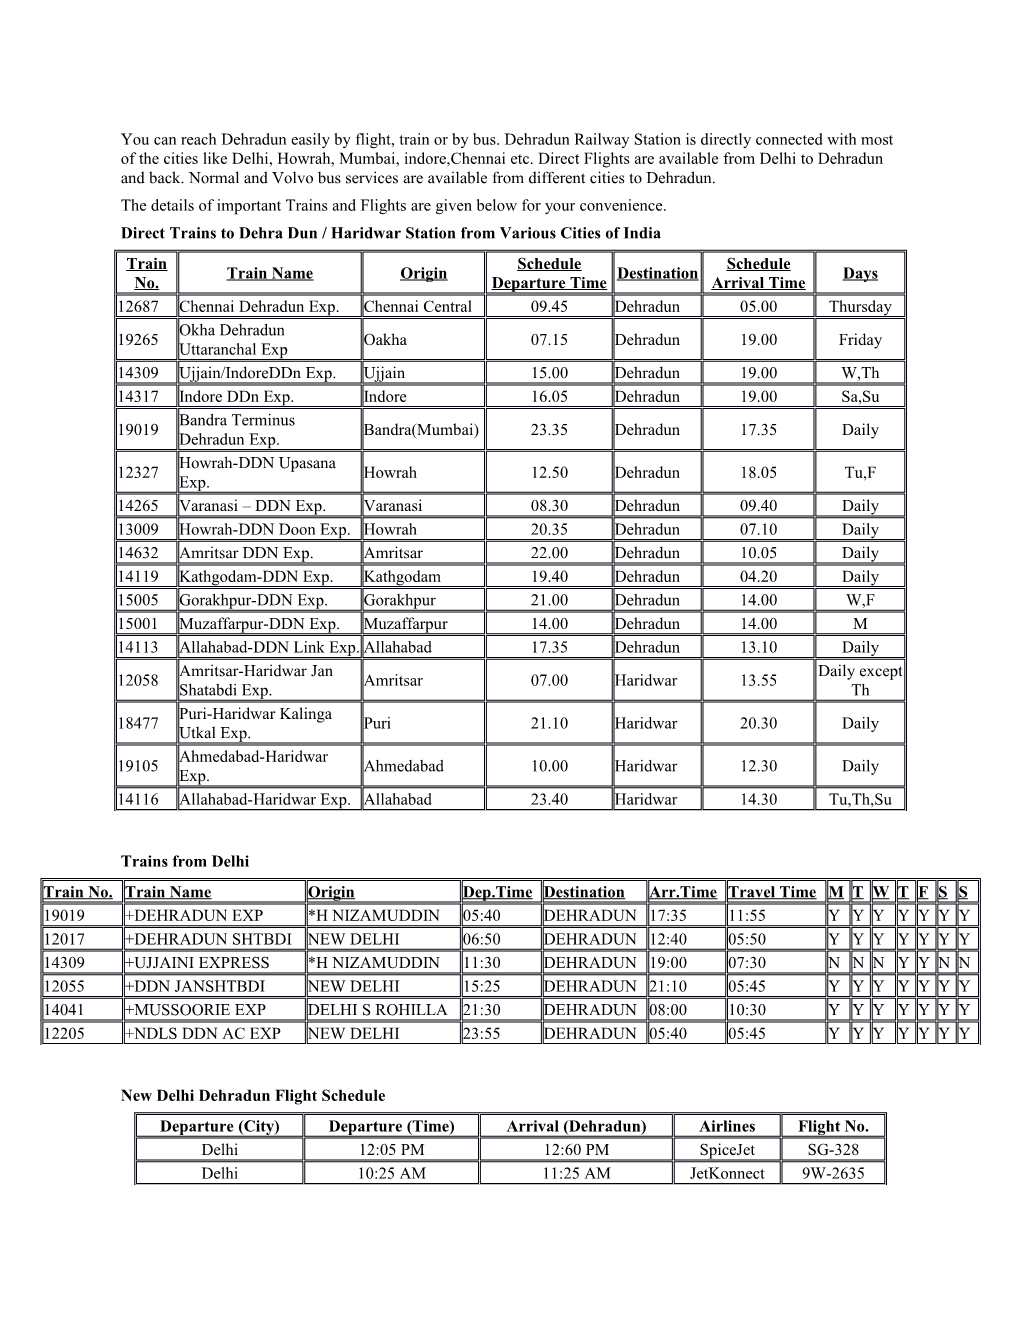 Direct Trains to Dehra Dun / Haridwar Station from Various Cities of India